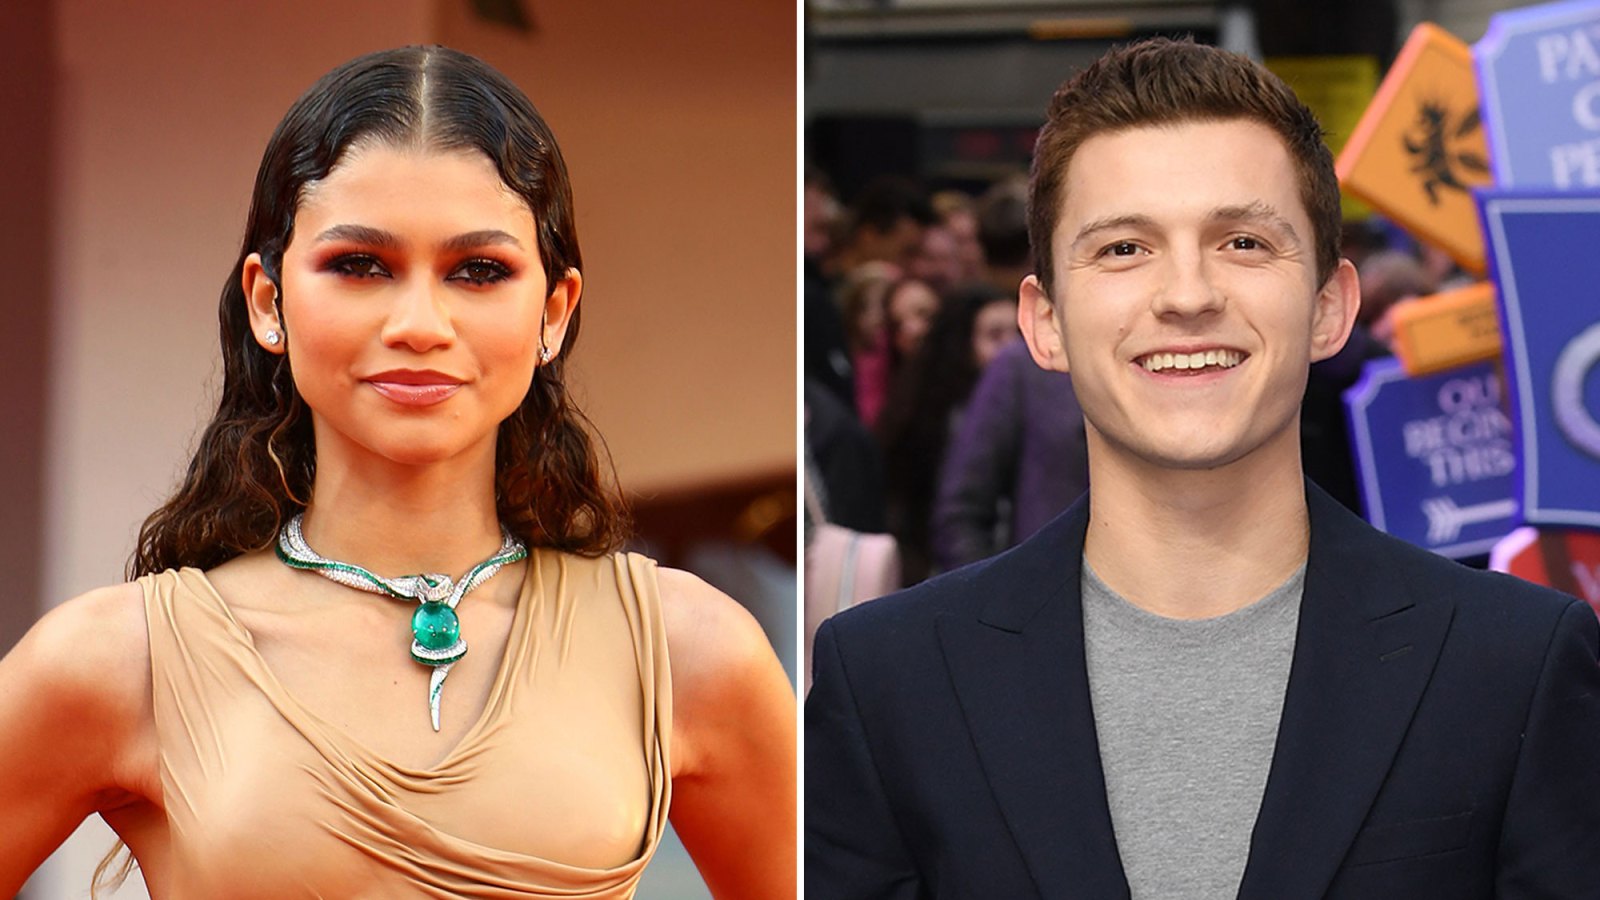 Zendaya Reveals What She Loves Most About 'Very Charismatic' Tom Holland Amid Romance